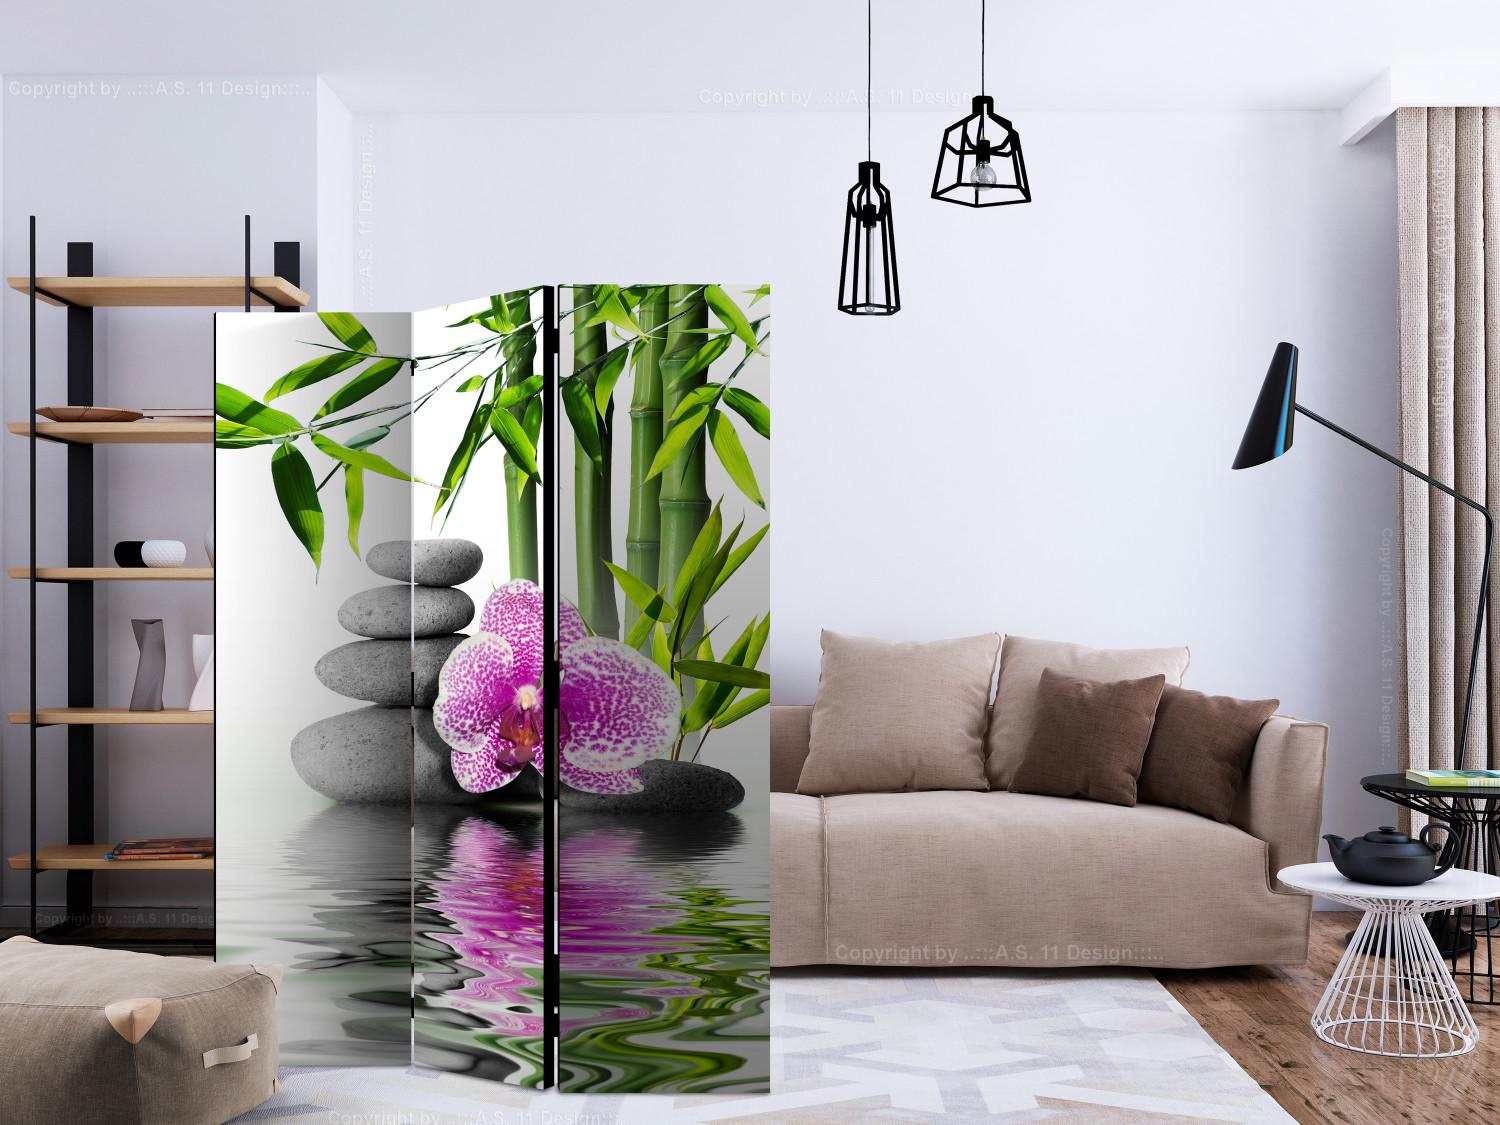 Room Divider Orchid Serenity (3-piece) - Zen-style stones amidst nature